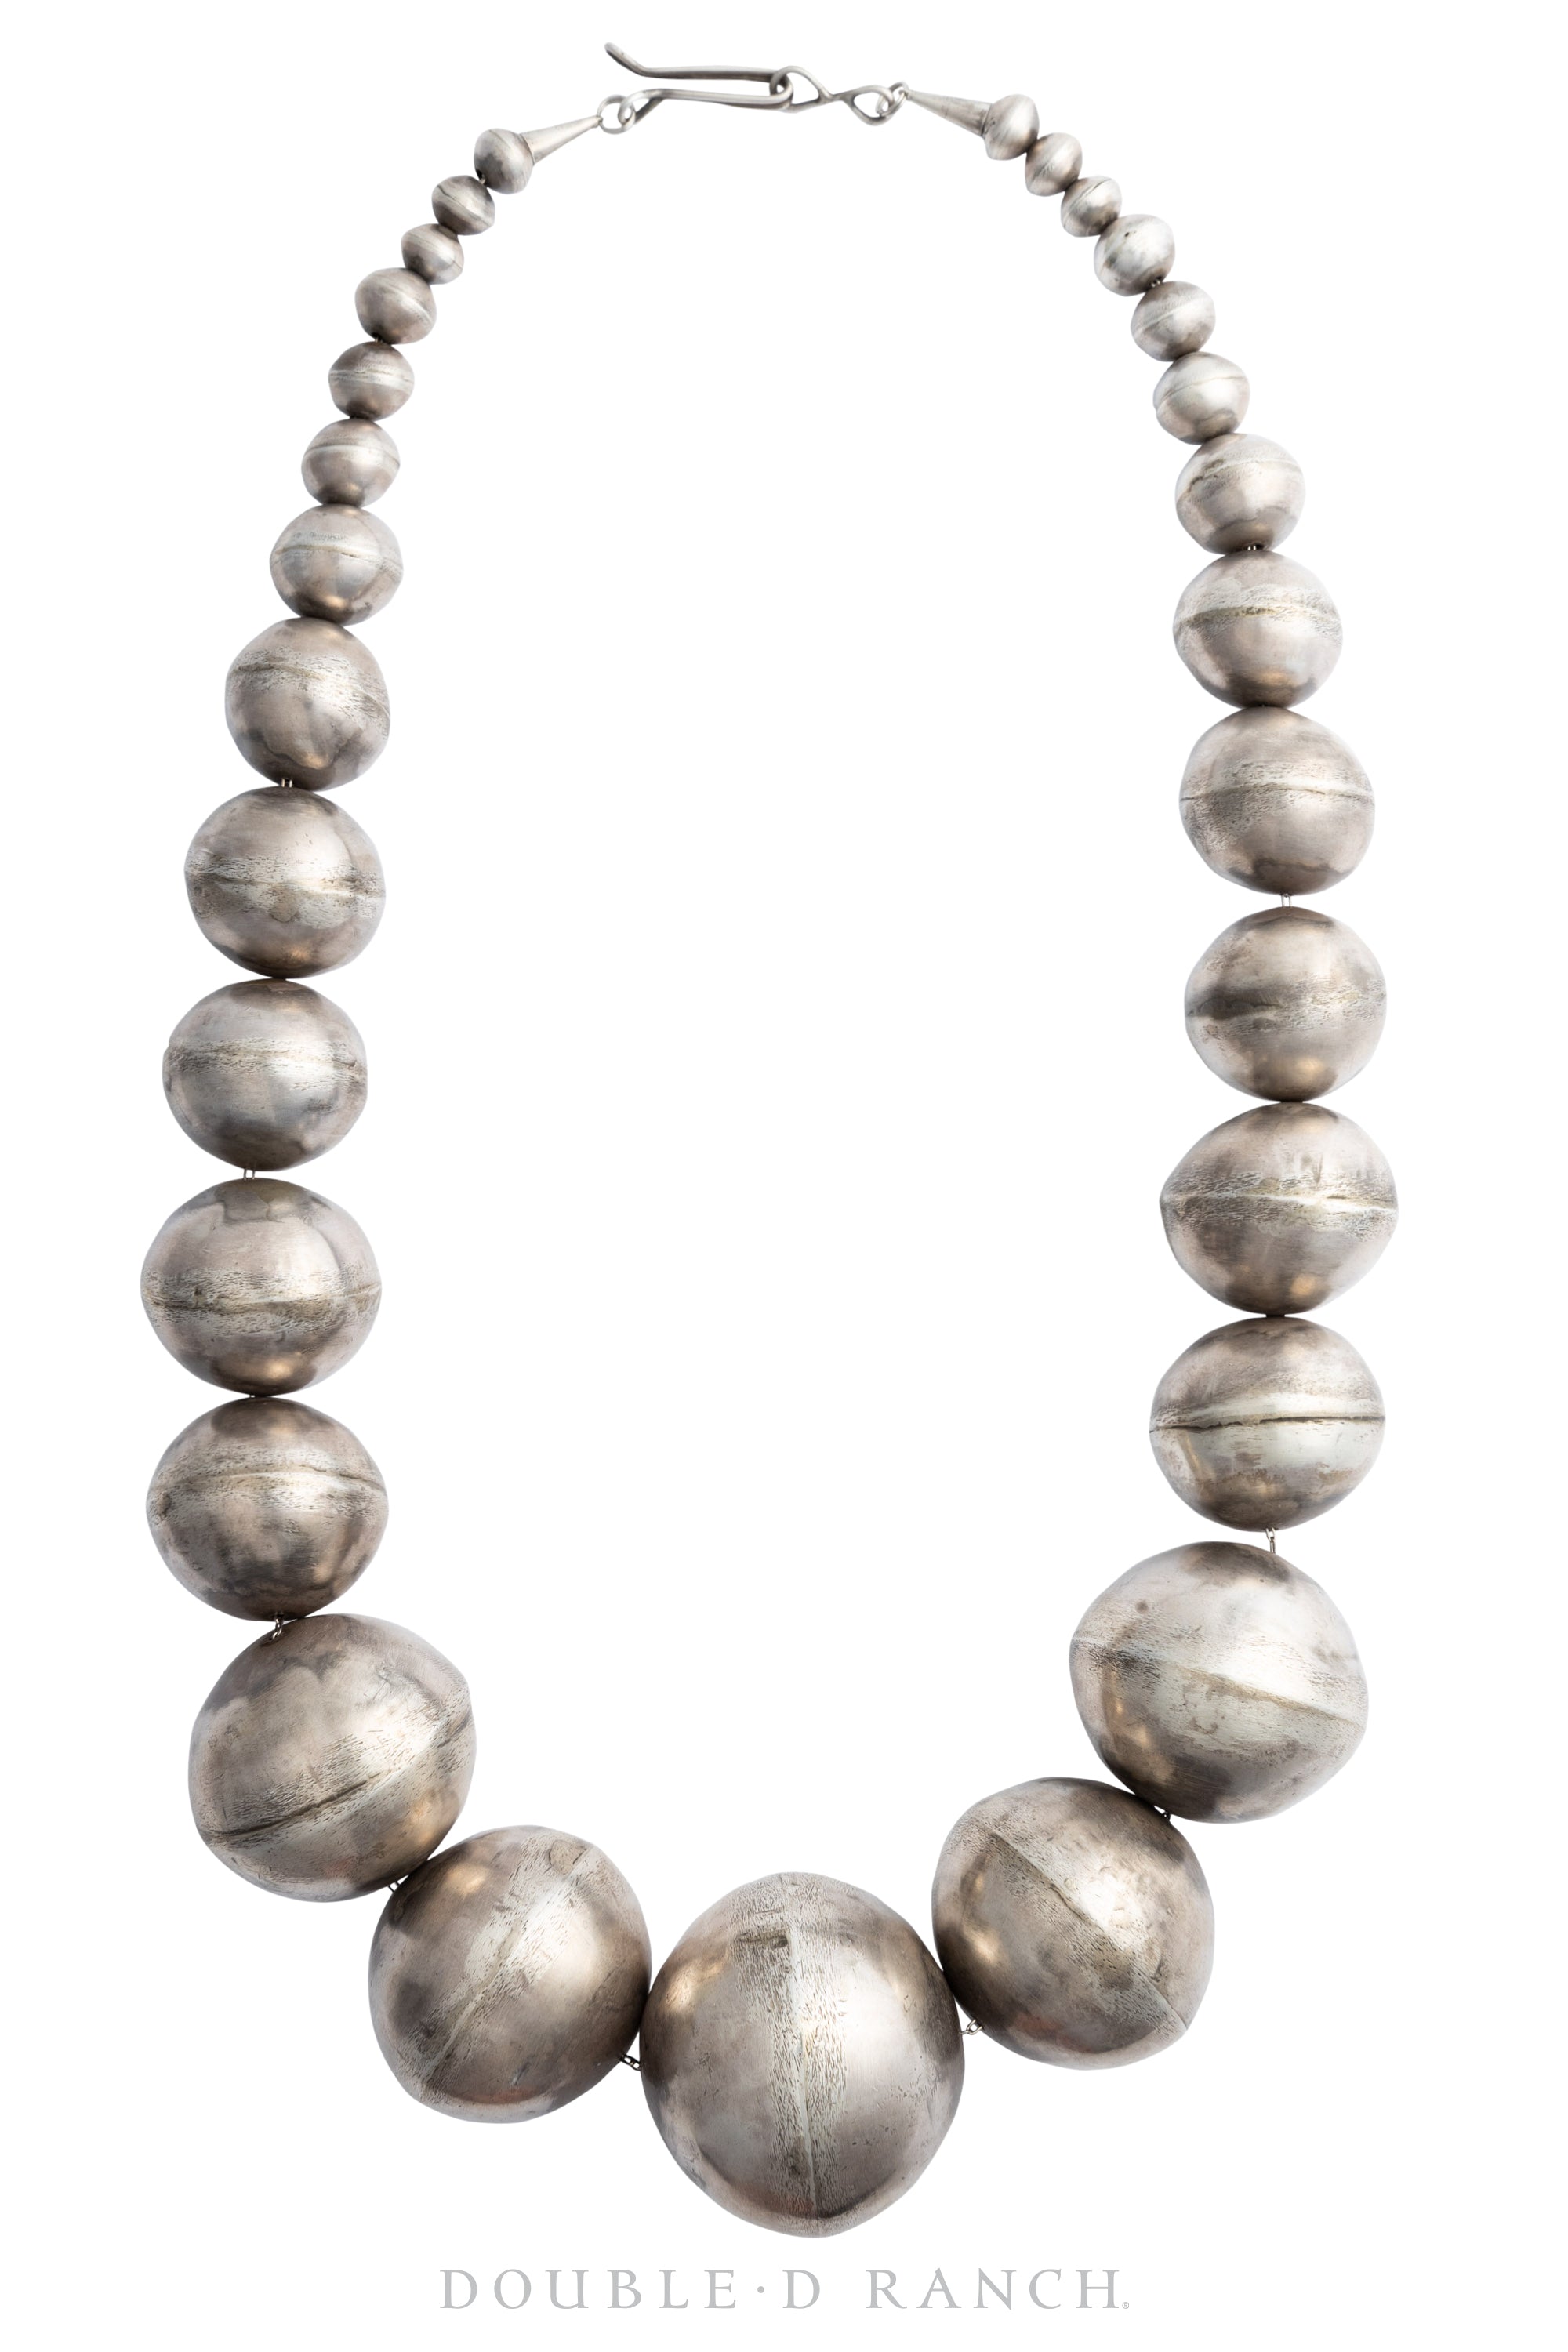 Necklace, Desert Pearls, Sterling Silver, Huge, Artisan, Contemporary, 1733